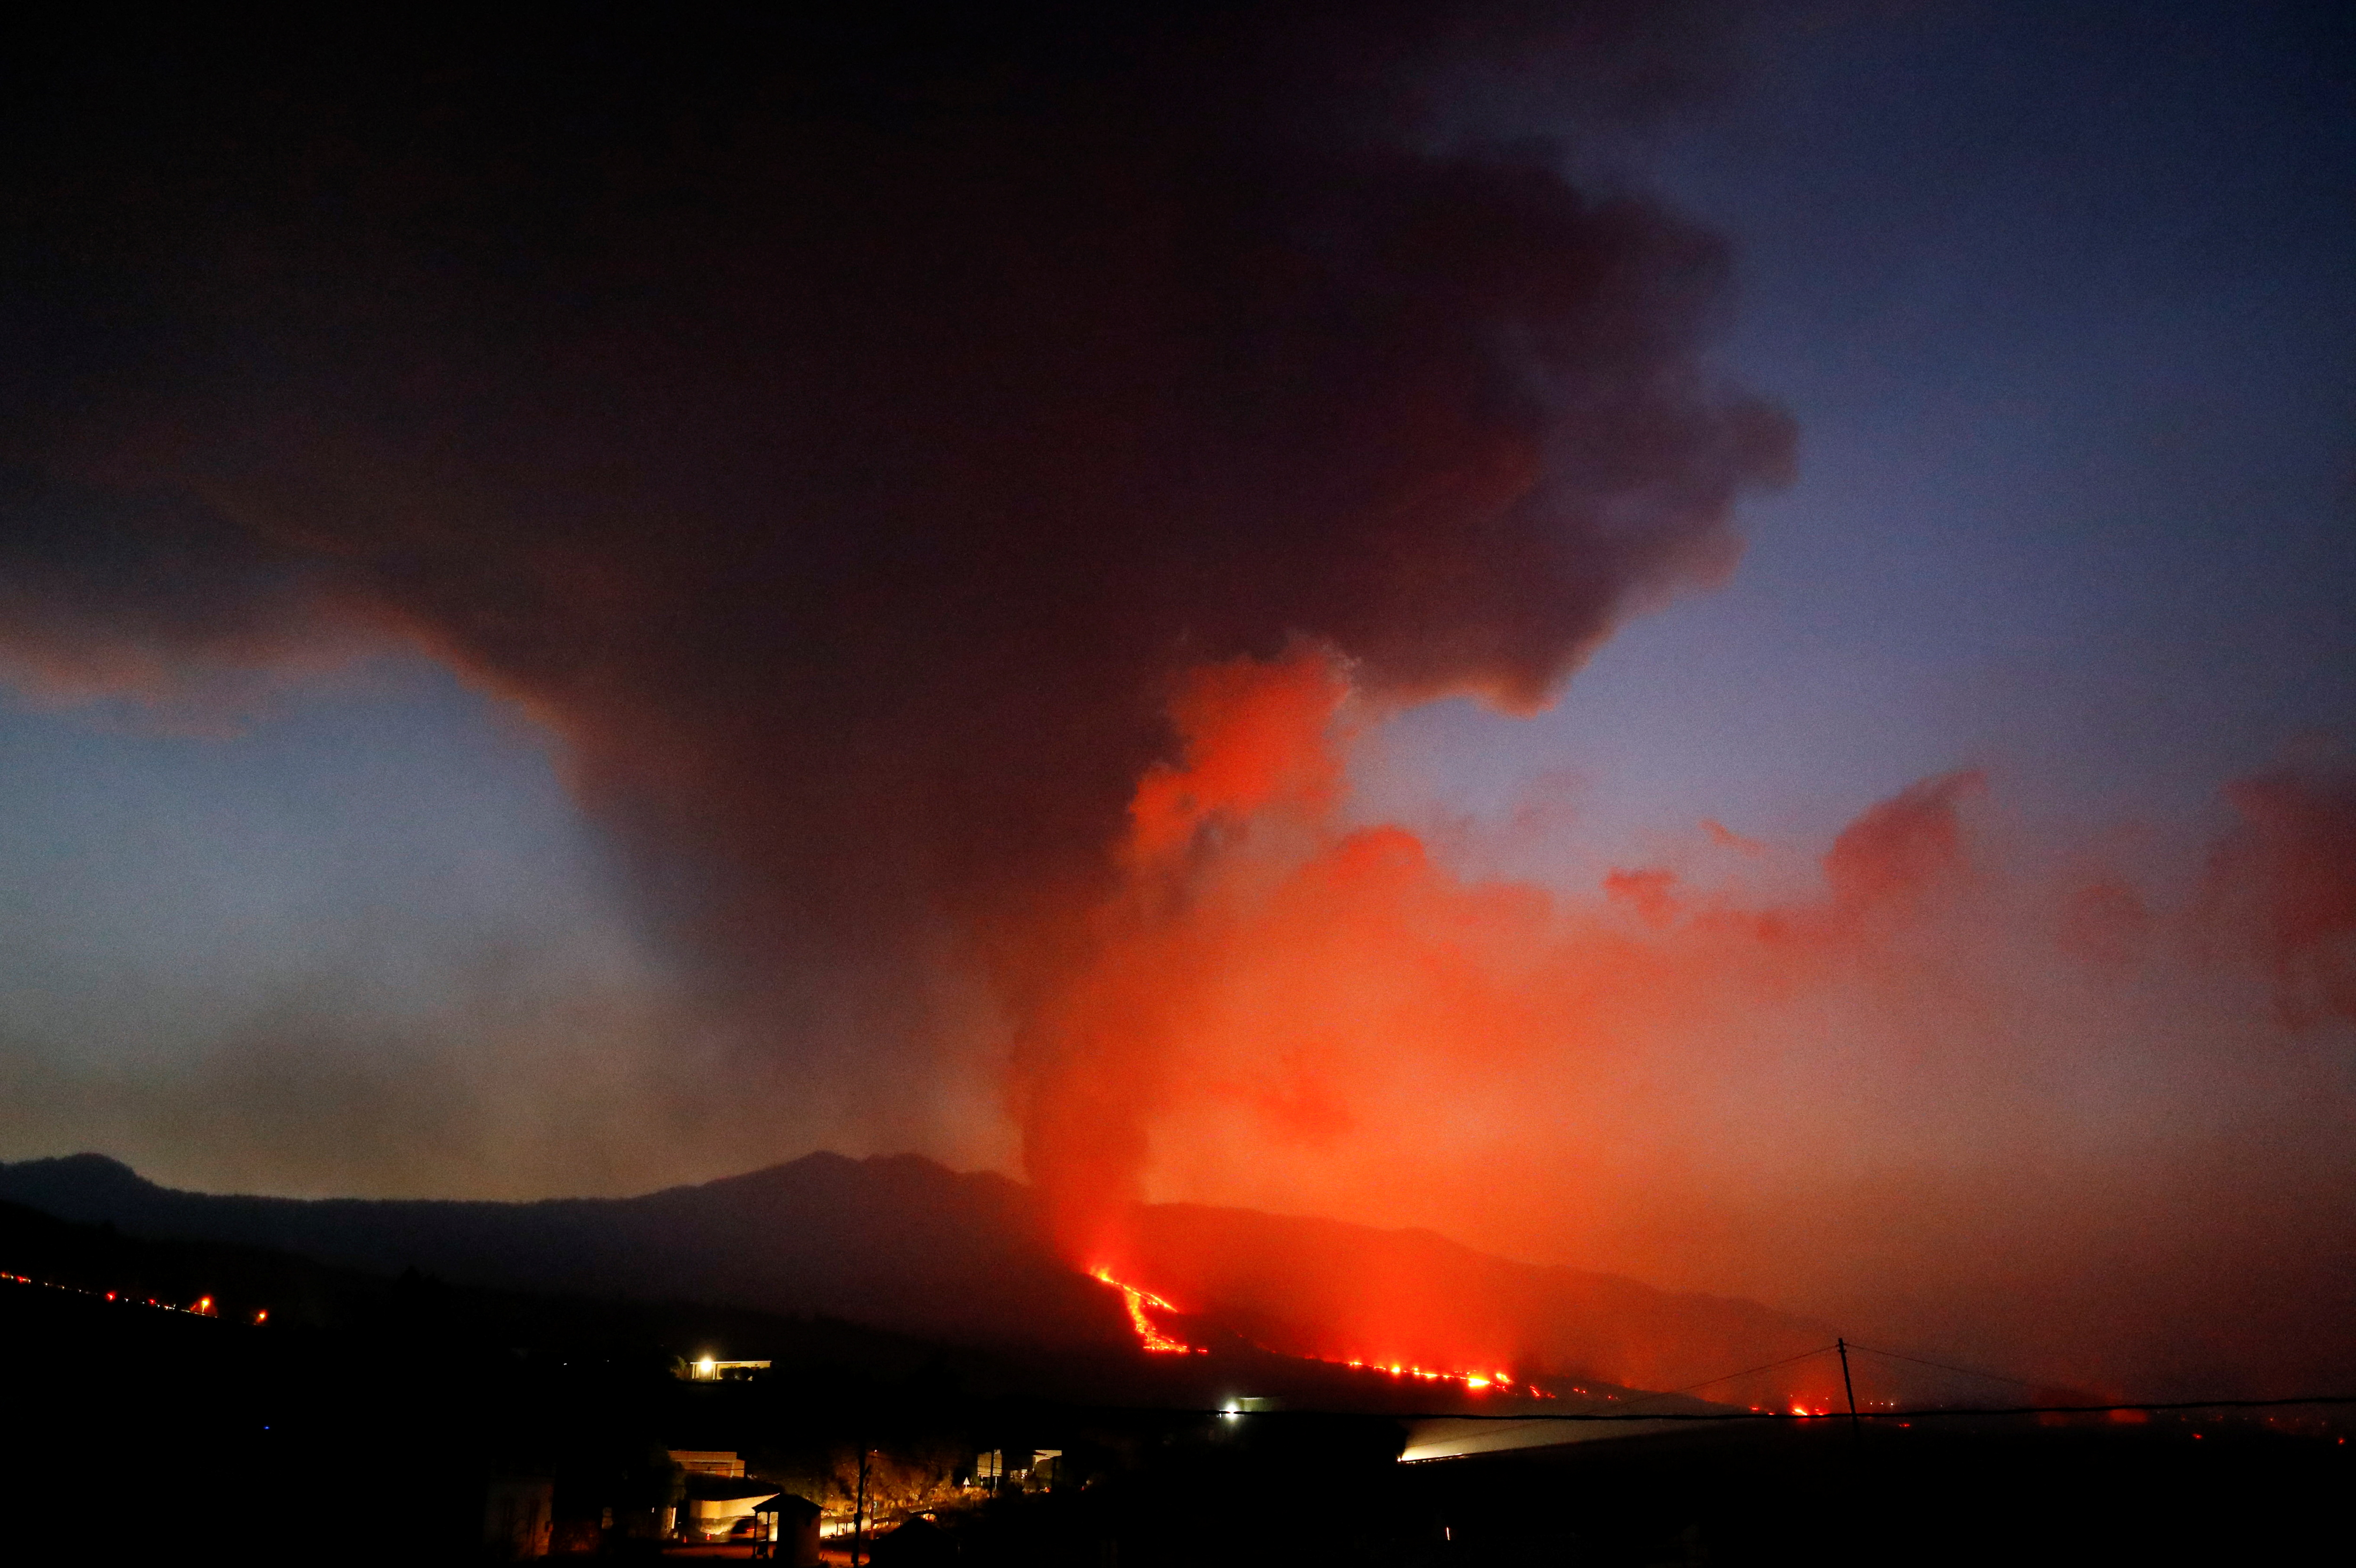 The Cumbre Vieja volcano spews lava and smoke while it continues to erupt, as seen from El Paso